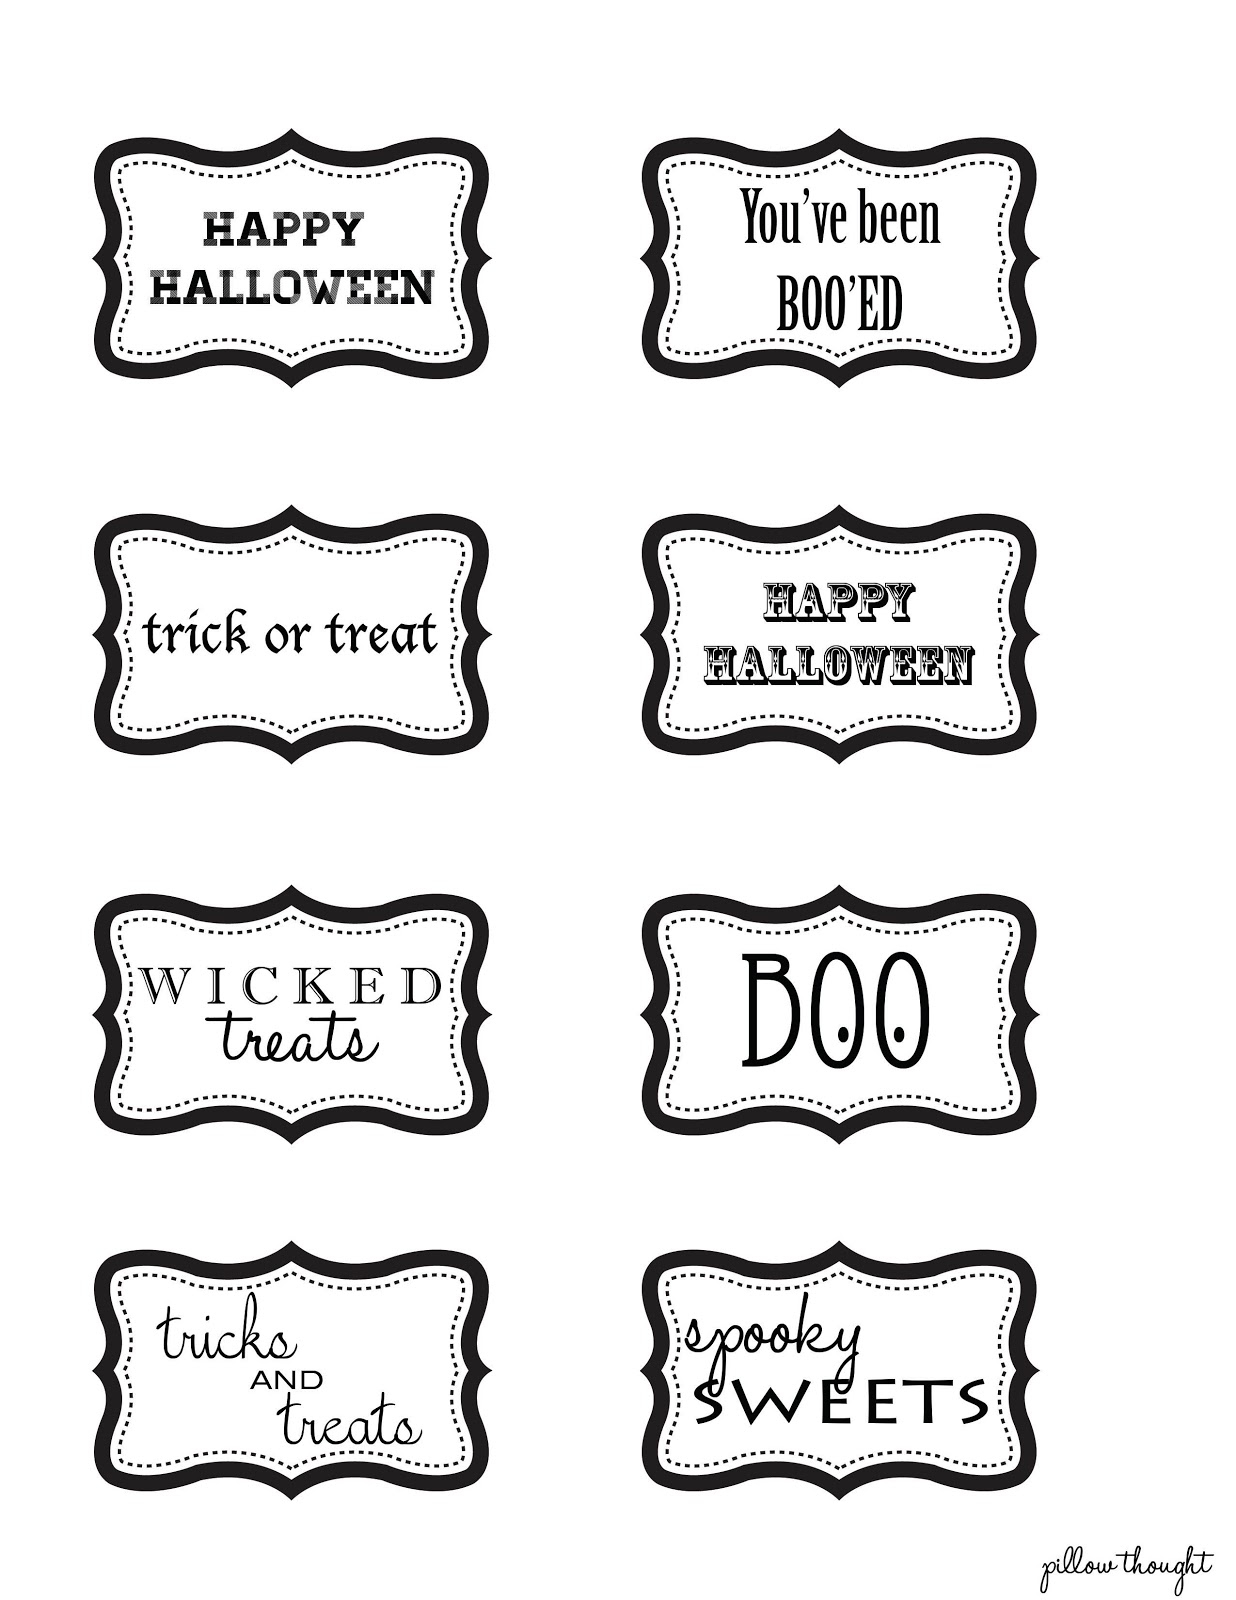 pillow-thought-halloween-gift-tag-printables